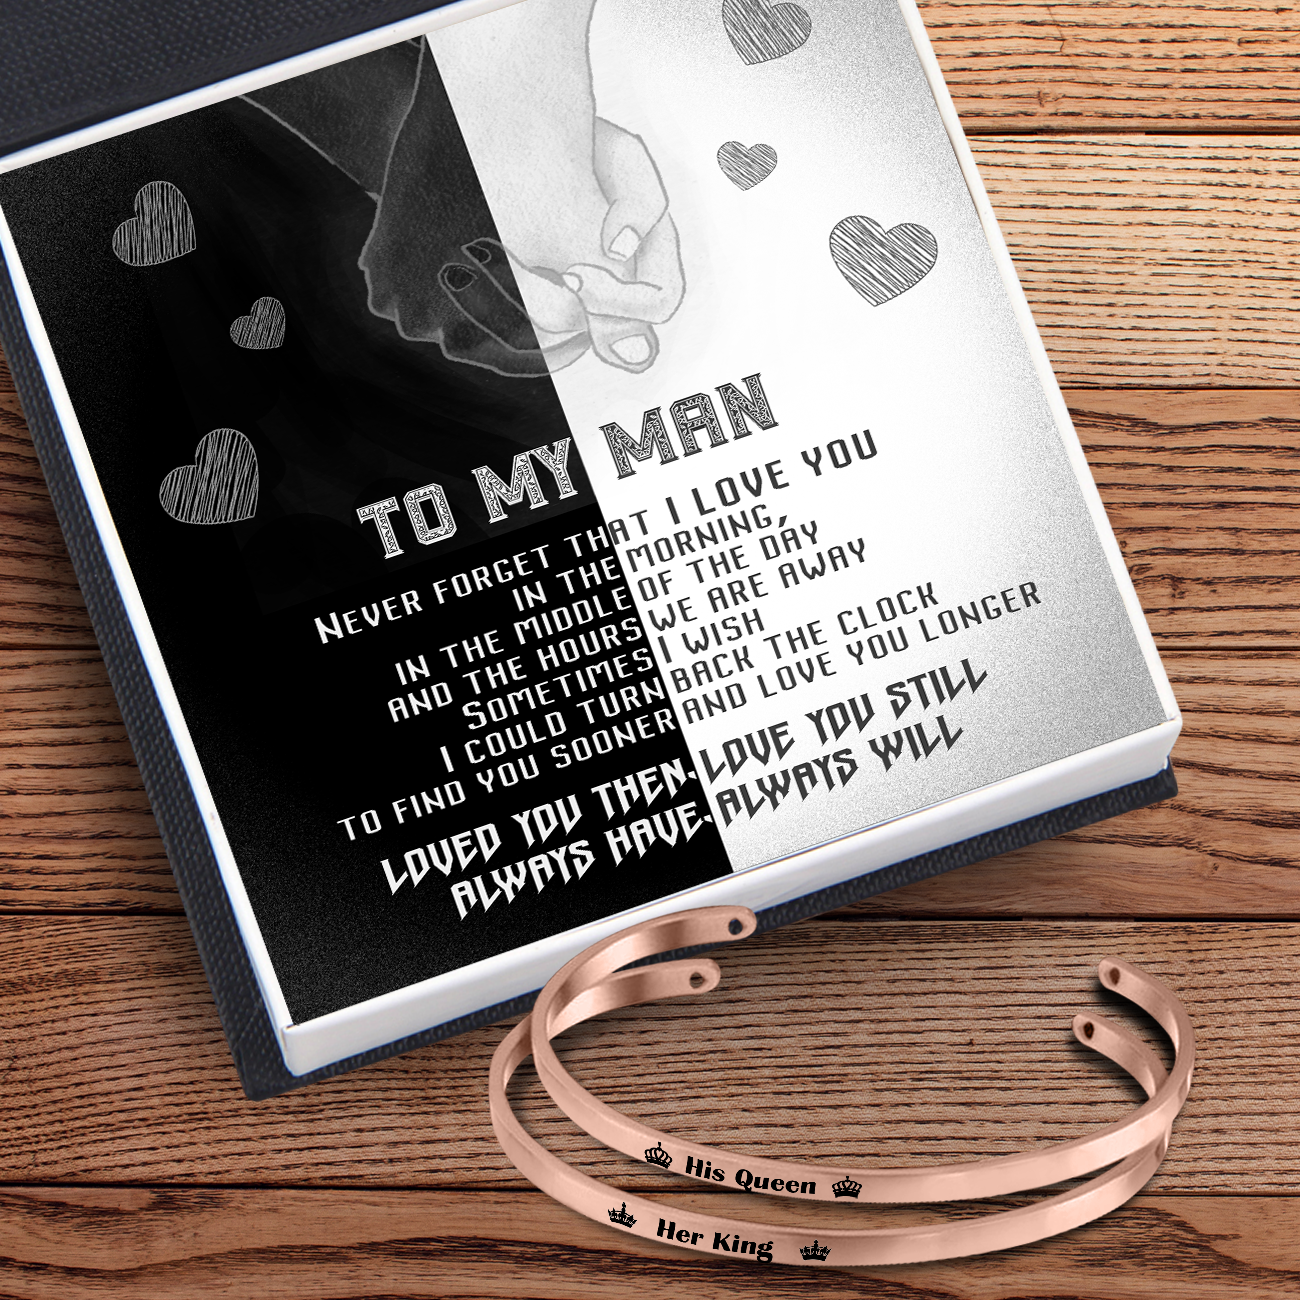 Couple Bracelets - to My Girlfriend - Never Forget That I Love You - Gbt13018 Silver